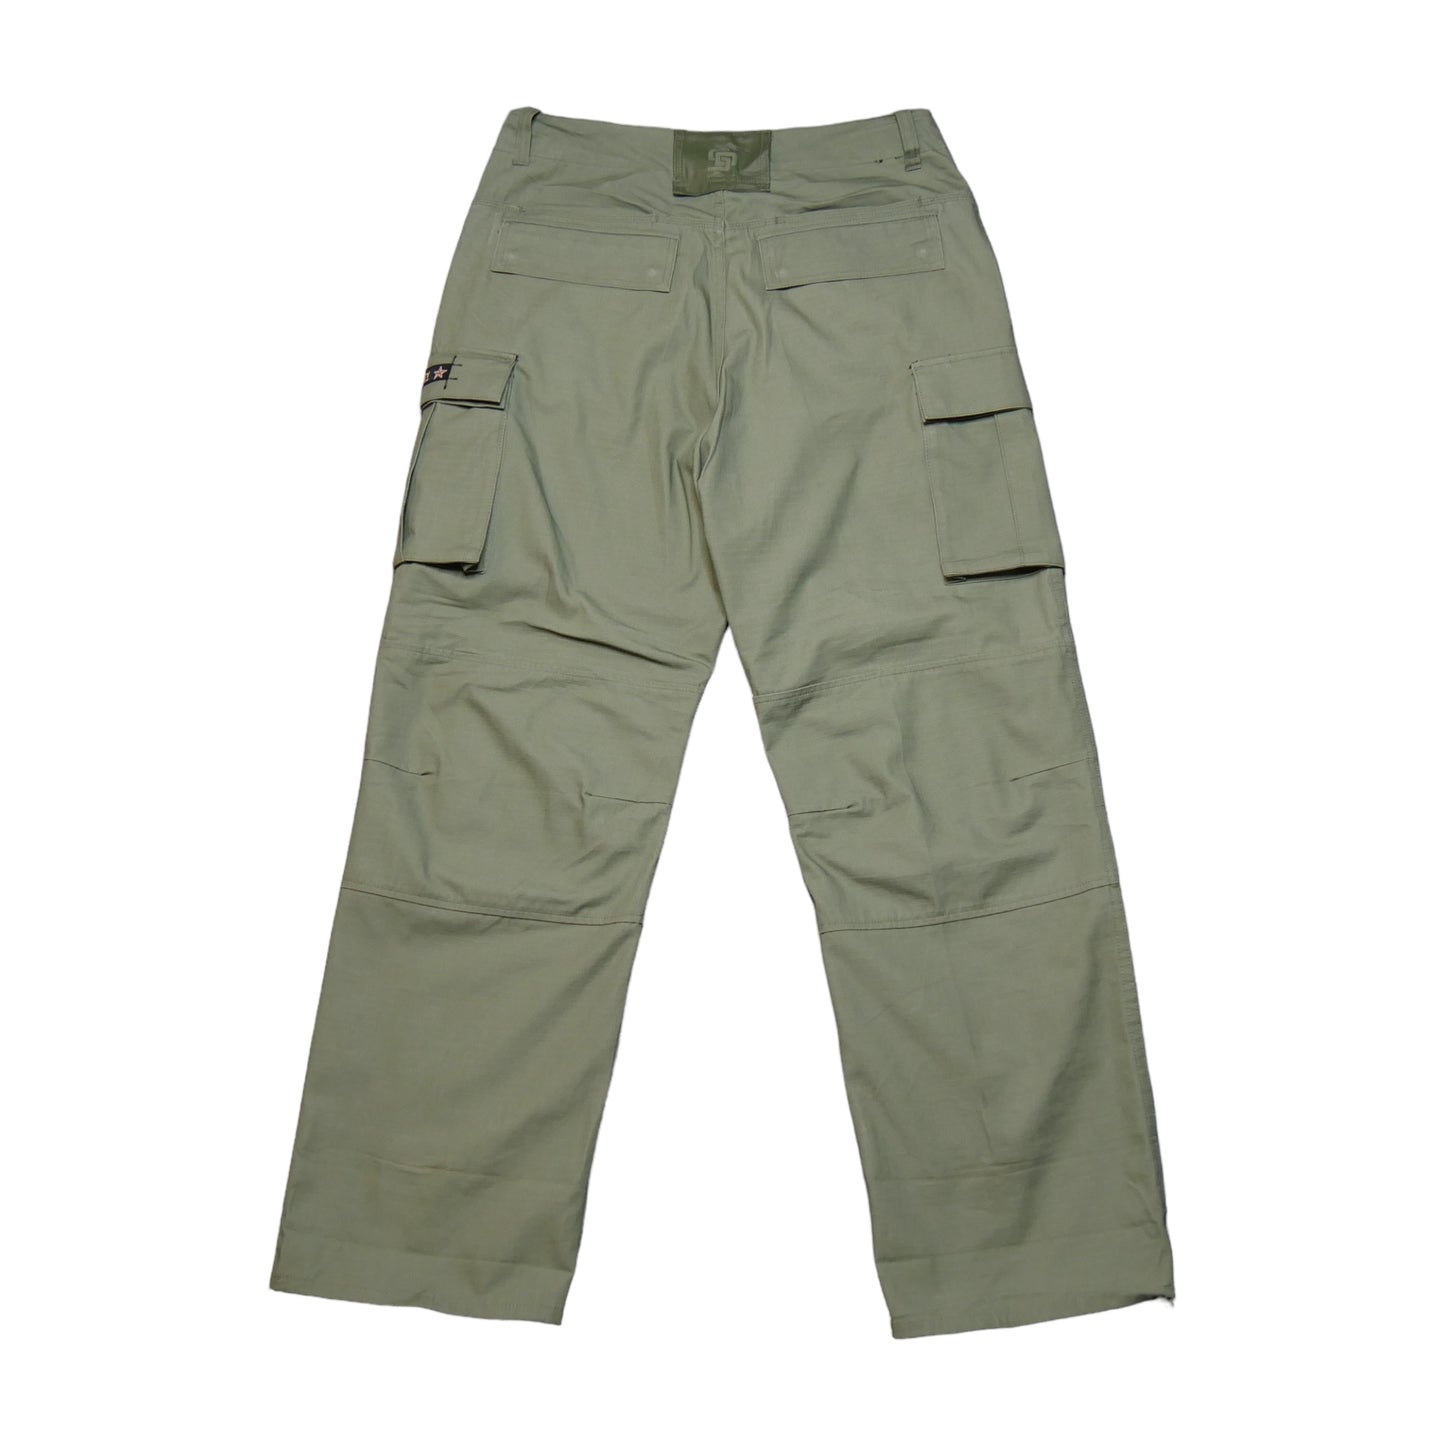 State Property Ripstop Cargo Pants - 36